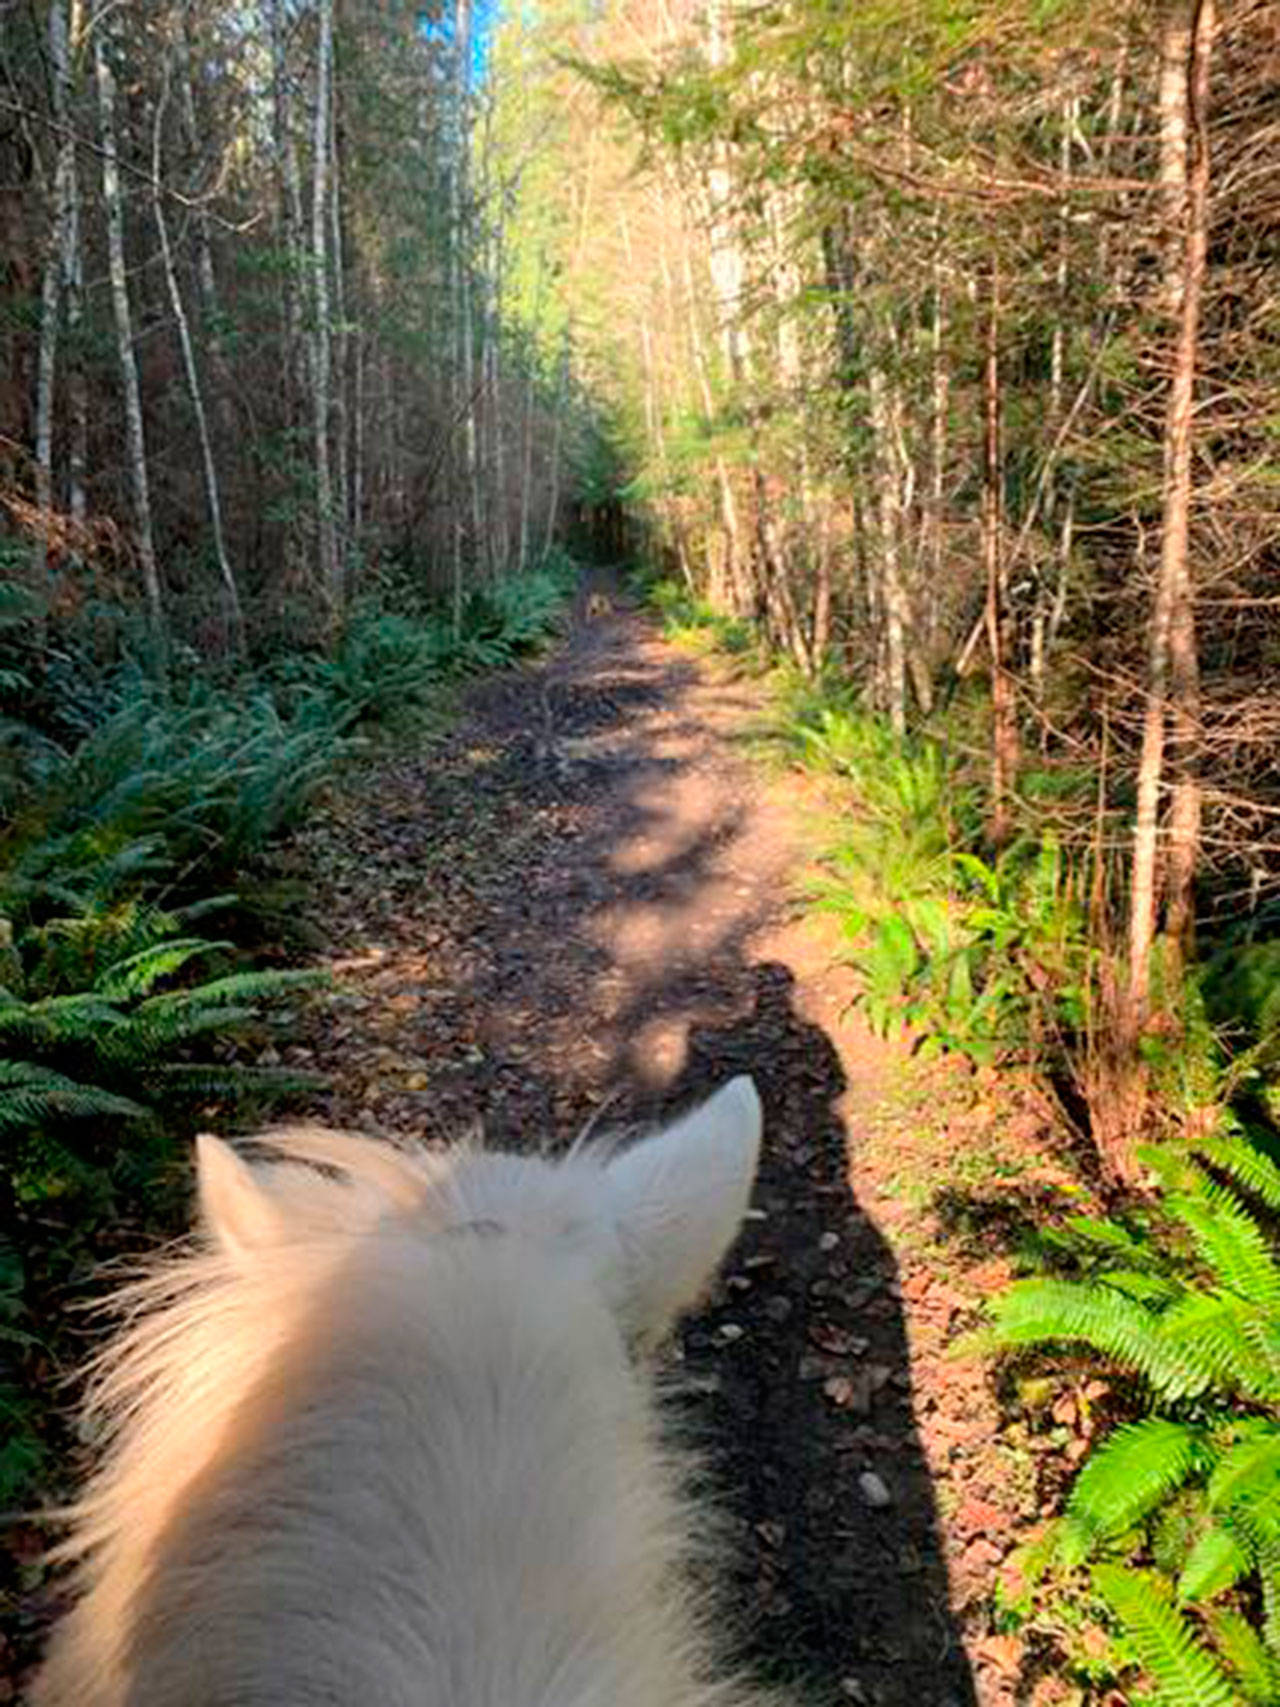 Kris Phillips rides her horse Nick through a trail at Miller Peninsula State Park near the area were a bear suddenly sprang out from the bushes and lunged at two horses and riders. A likely scenario is the bear was warning them they were too close to her cubs. Notice how the horse has one ear cocked forward and the other ear back as he listens to the sounds around them. (Kris Phillips)